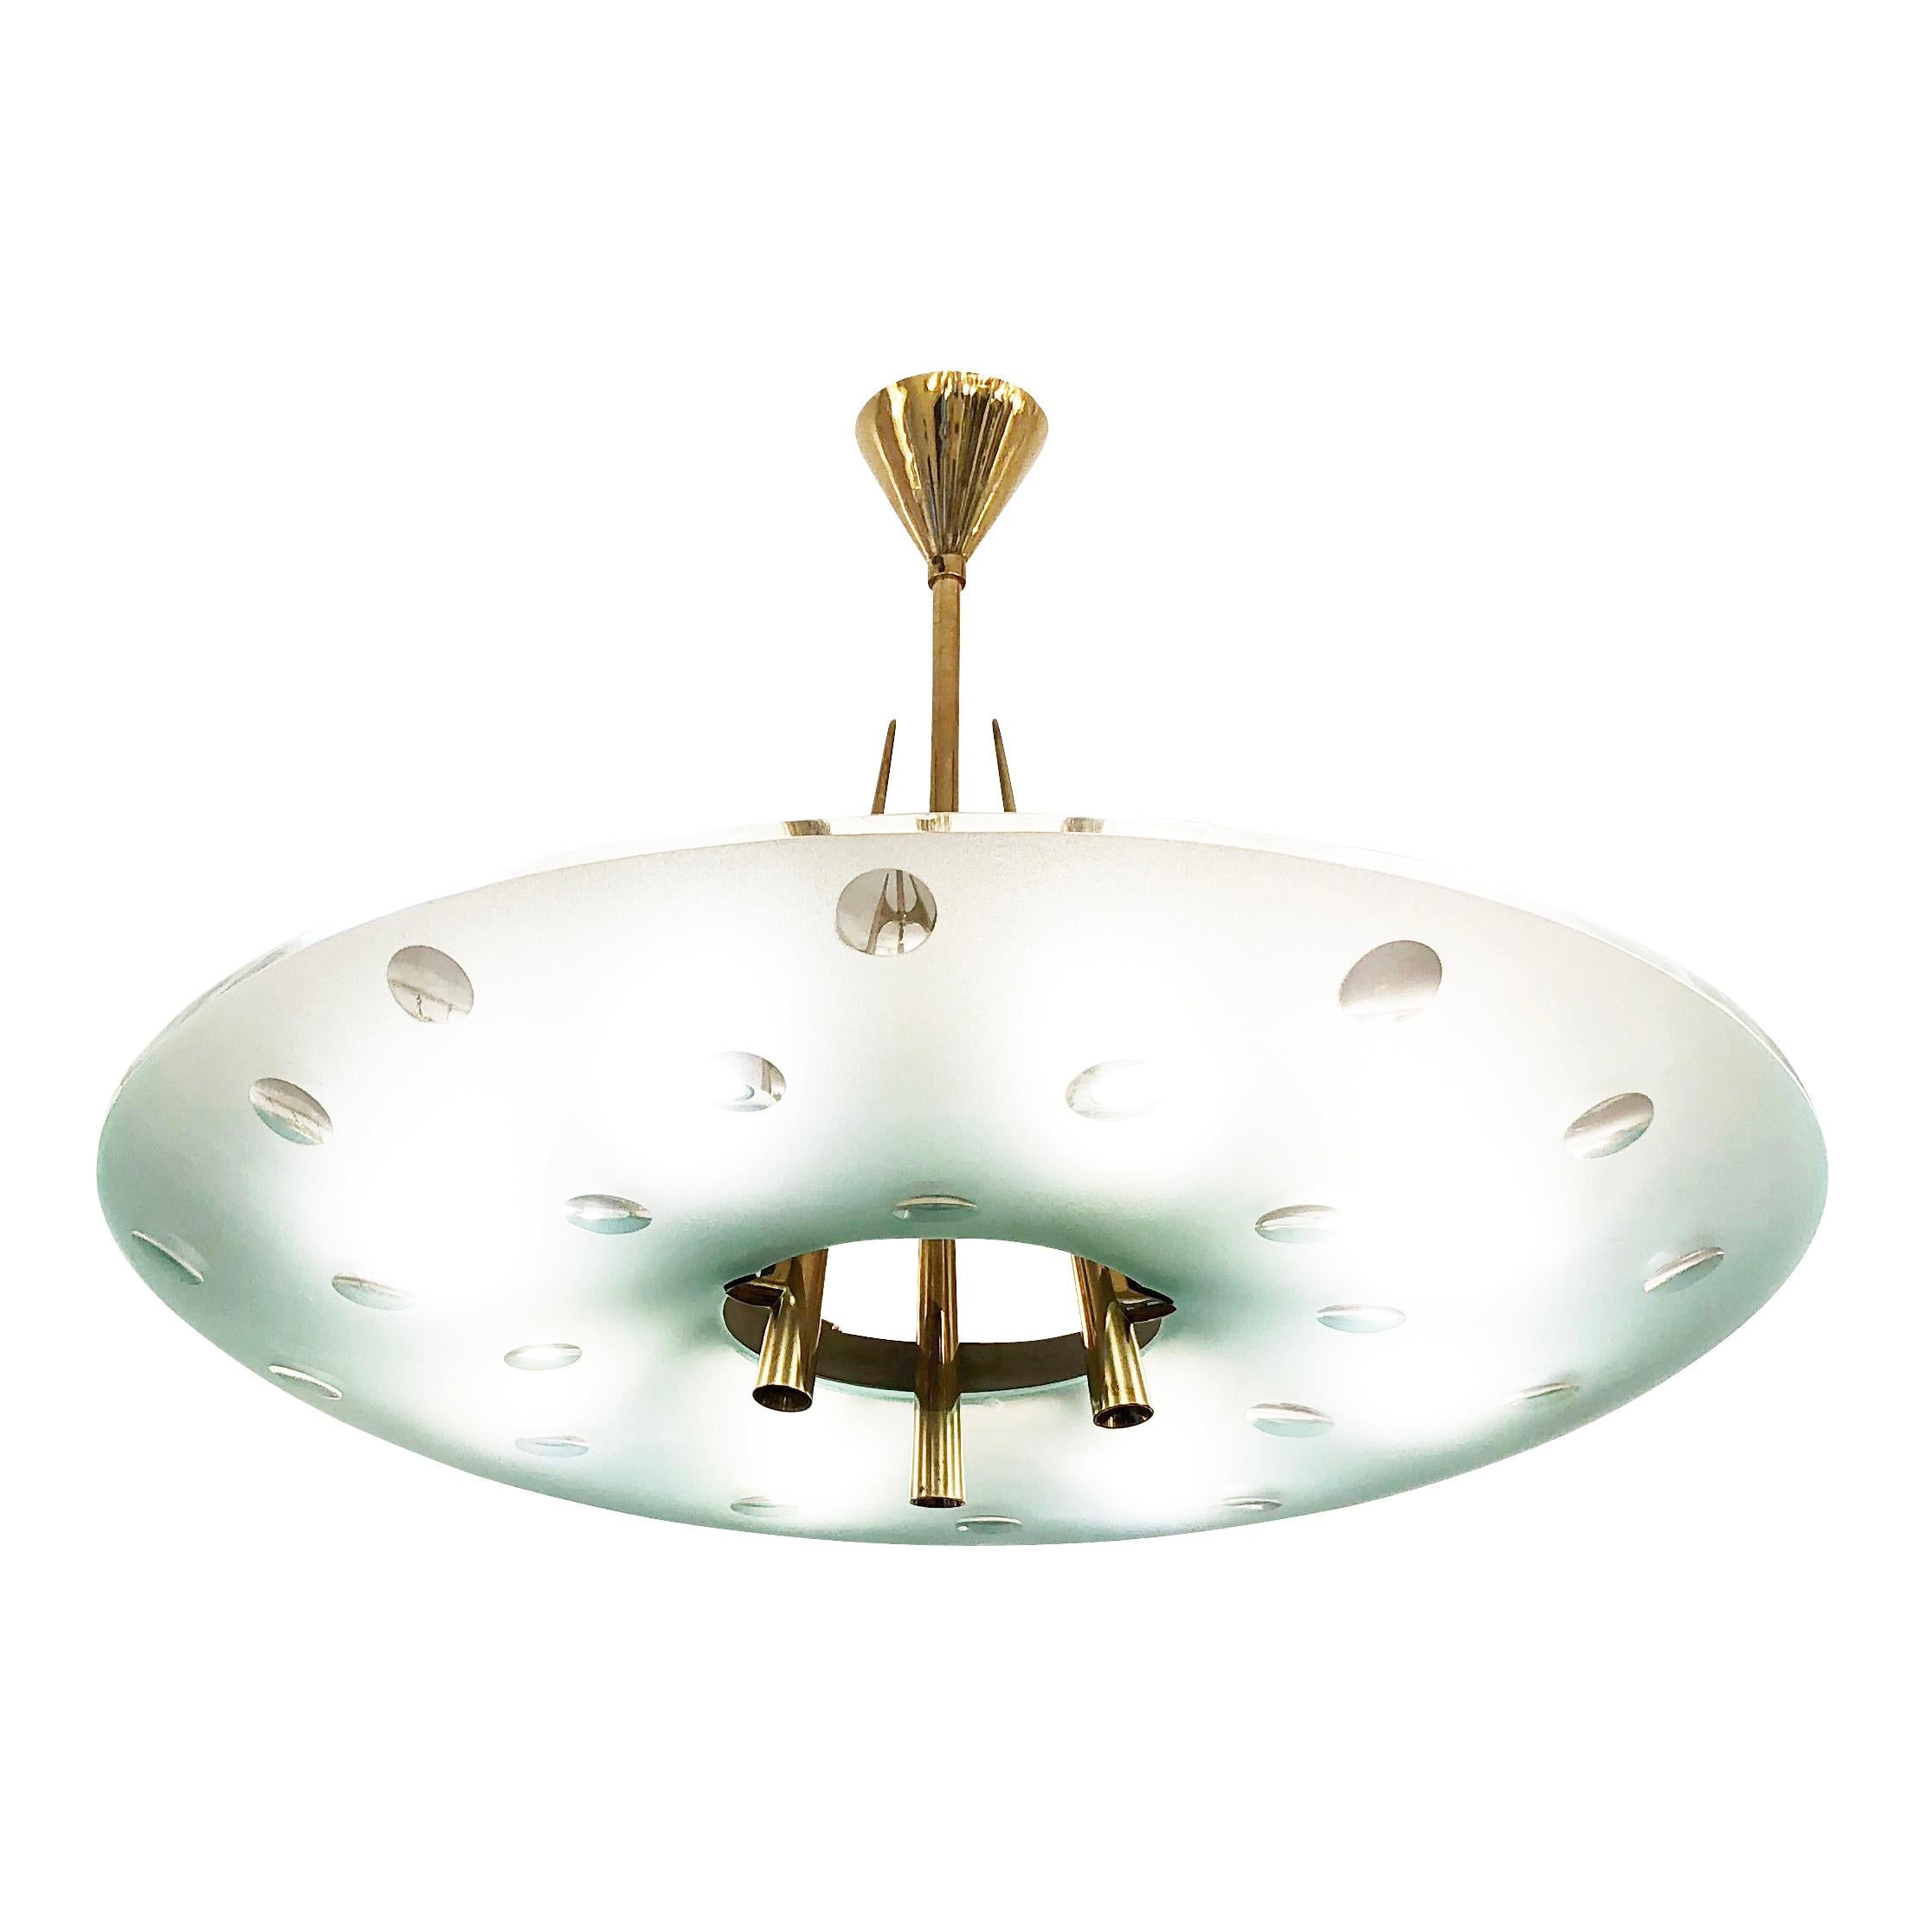 Stunning chandelier model 1758 designed by Max Ingrand for Fontana Arte in the 1950’s. Features a “pearled” frosted glass shade with hand carved clear circles. The glass has a slight blue/green tint as seen in most Fontana Arte pieces. The polished